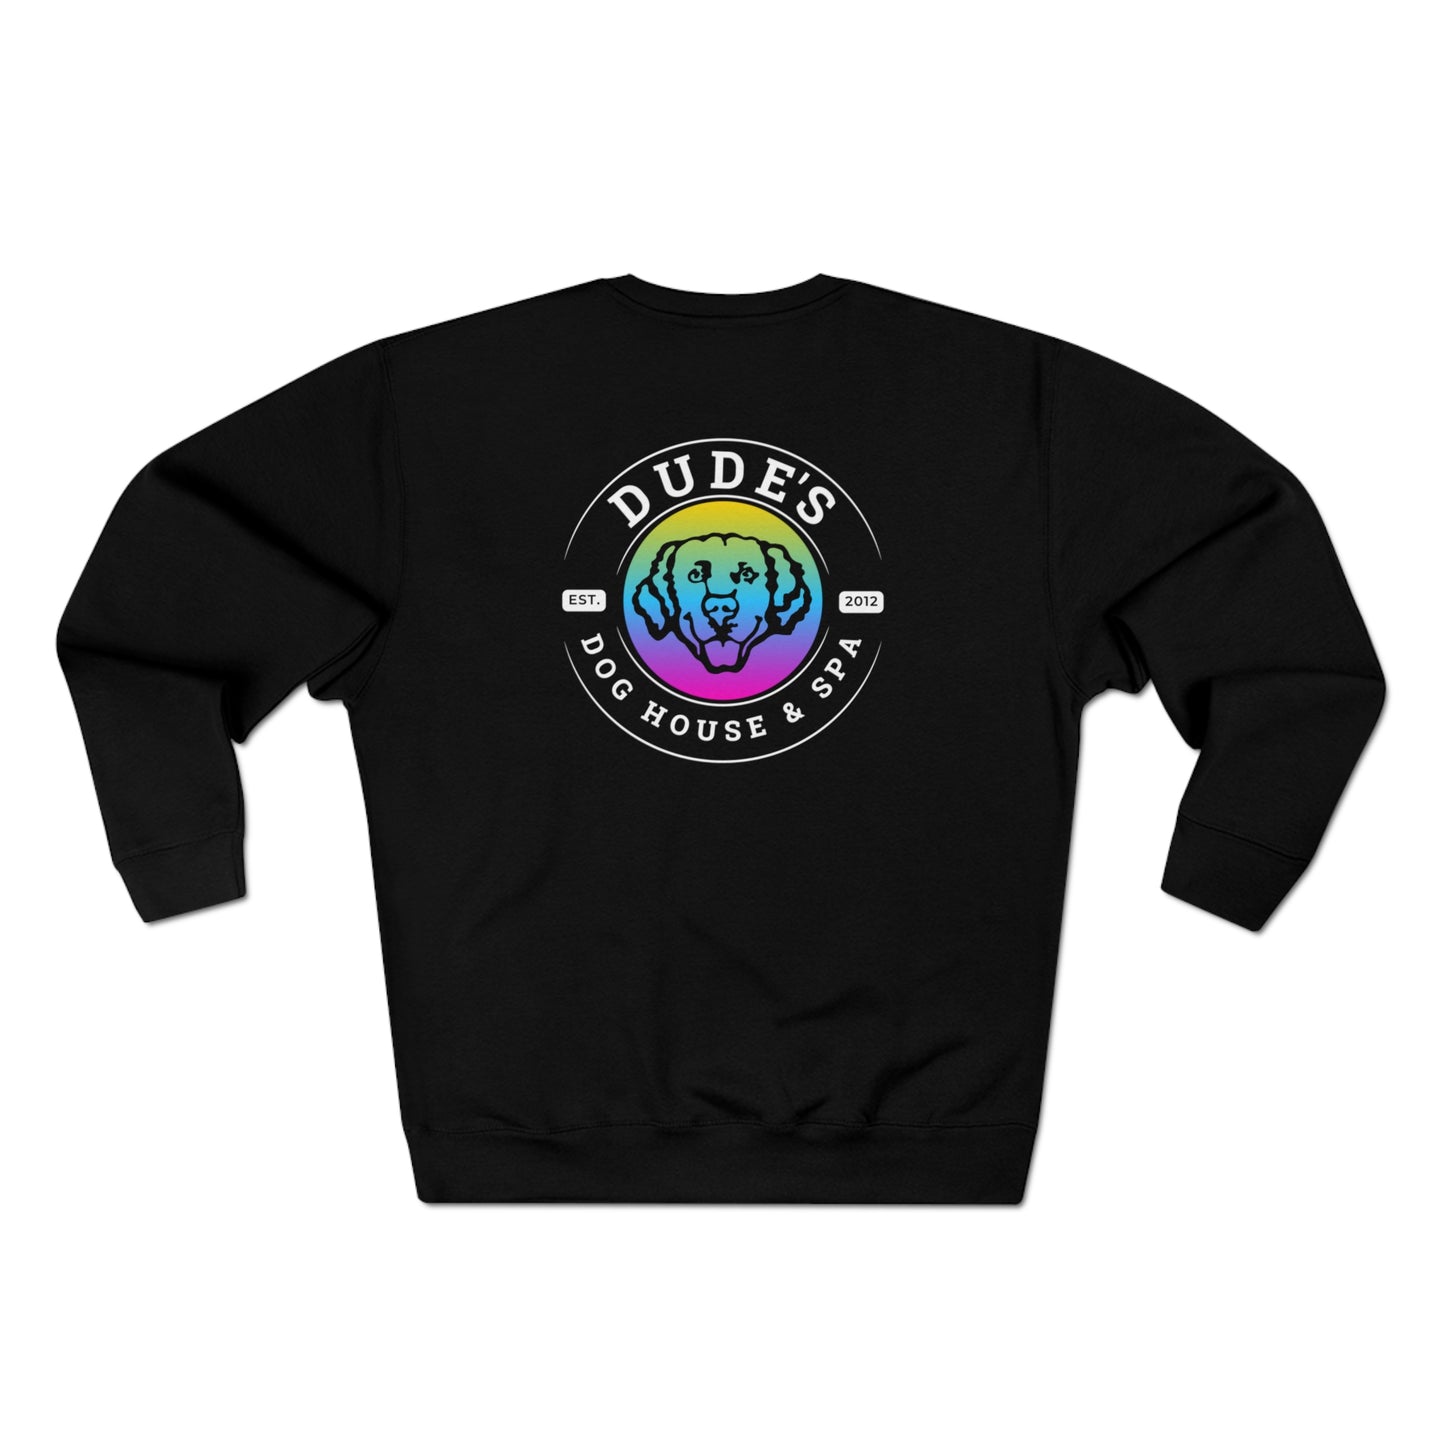 I Let the Dogs Out | Crewneck Sweatshirt